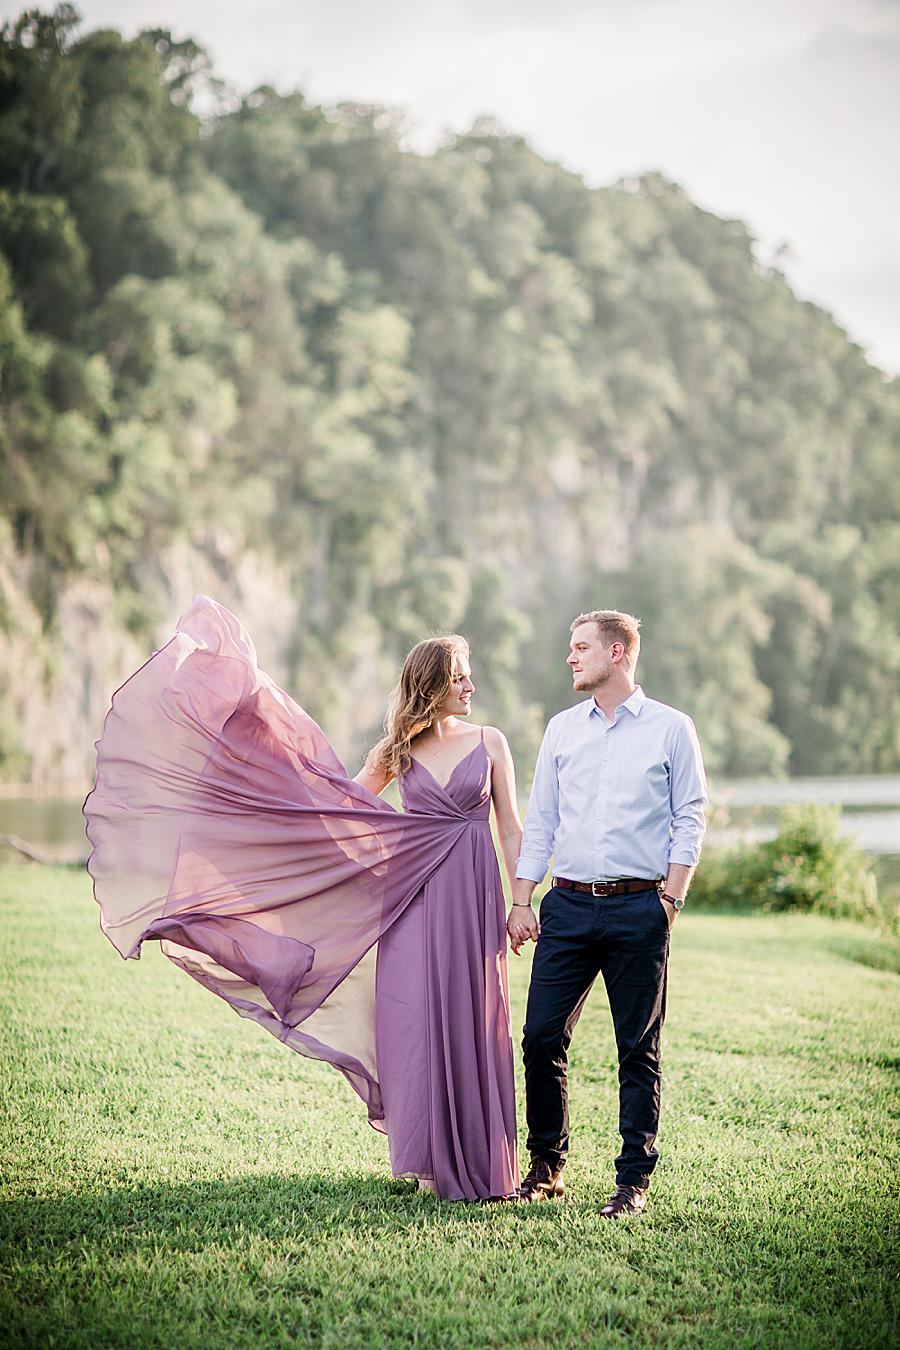 Skirt flip at this 2018 favorite engagements by Knoxville Wedding Photographer, Amanda May Photos.